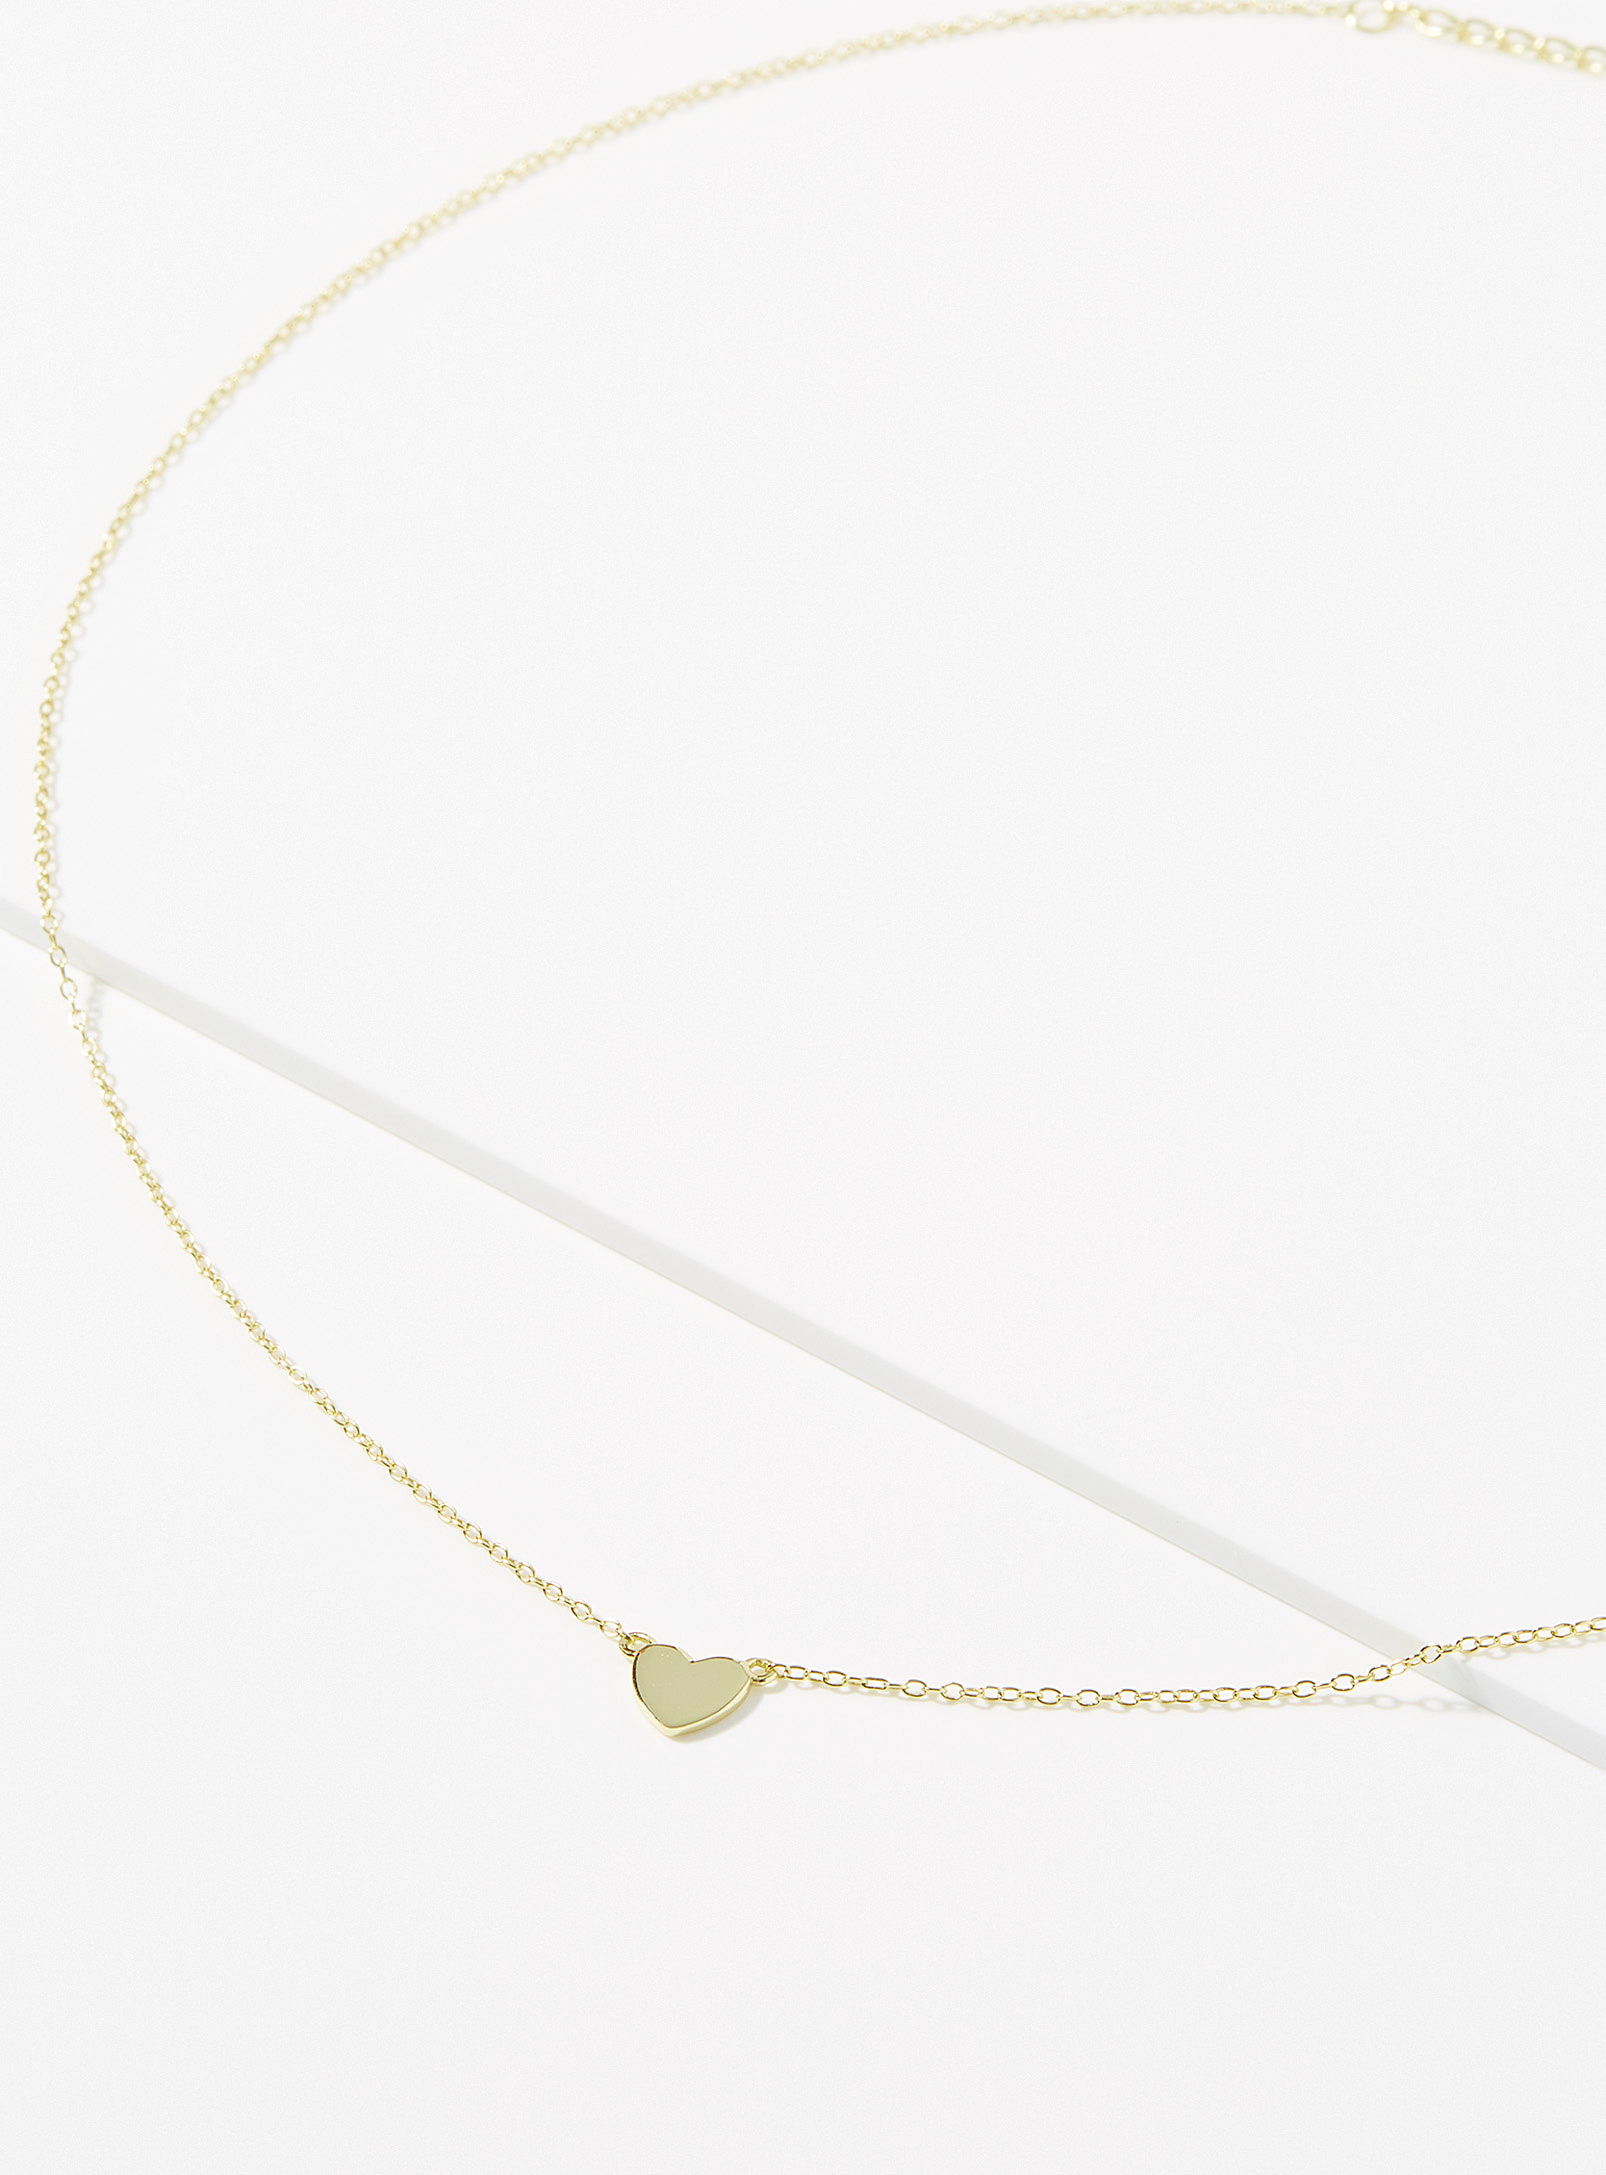 Midi34 X Simons Gold Isabelle Necklace In Assorted